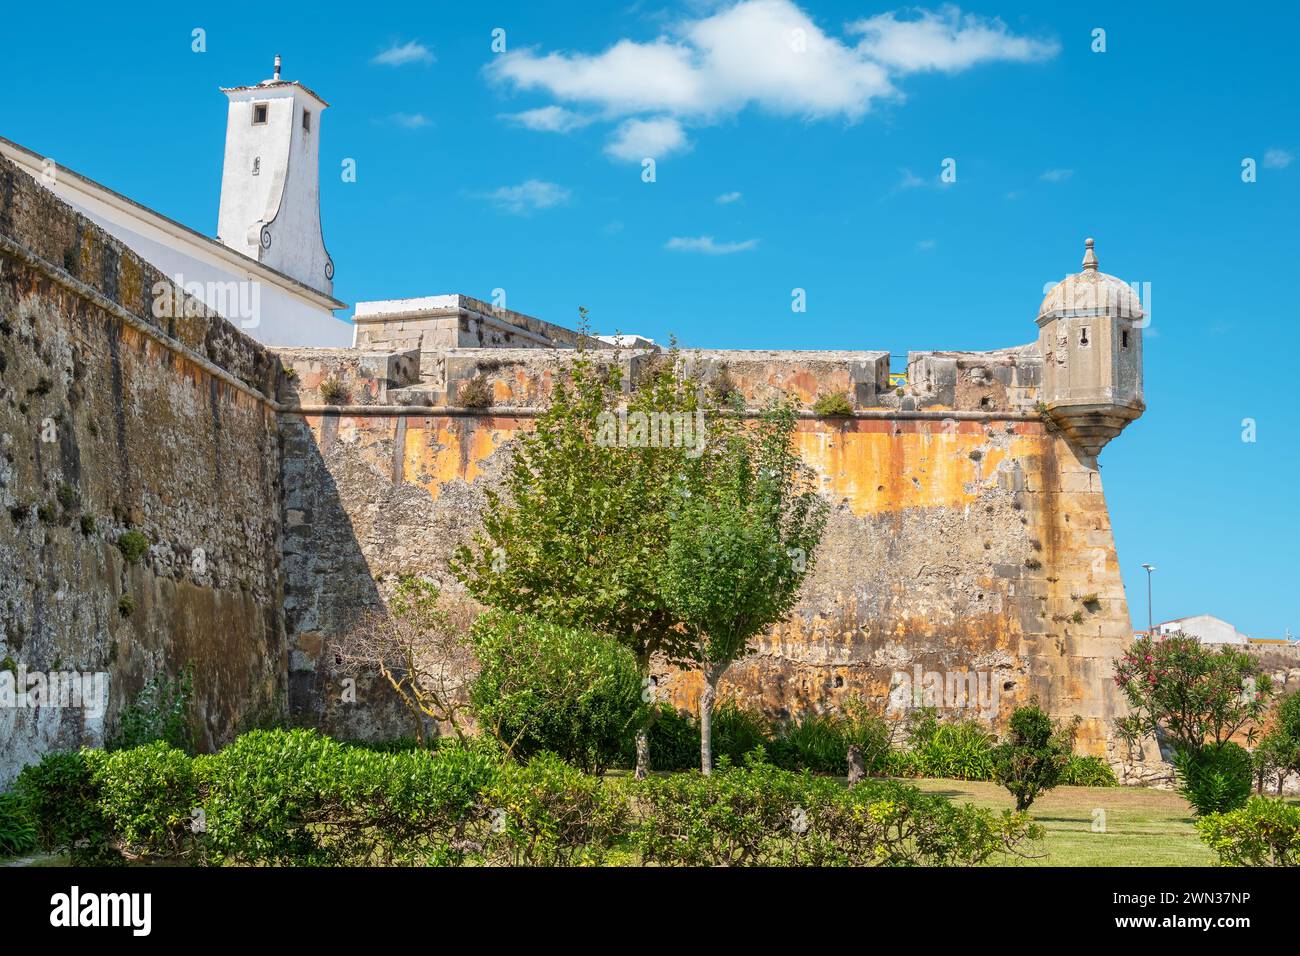 Defensive walls and bastions of medieval fortress in Peniche. Leiria, Portugal Stock Photo